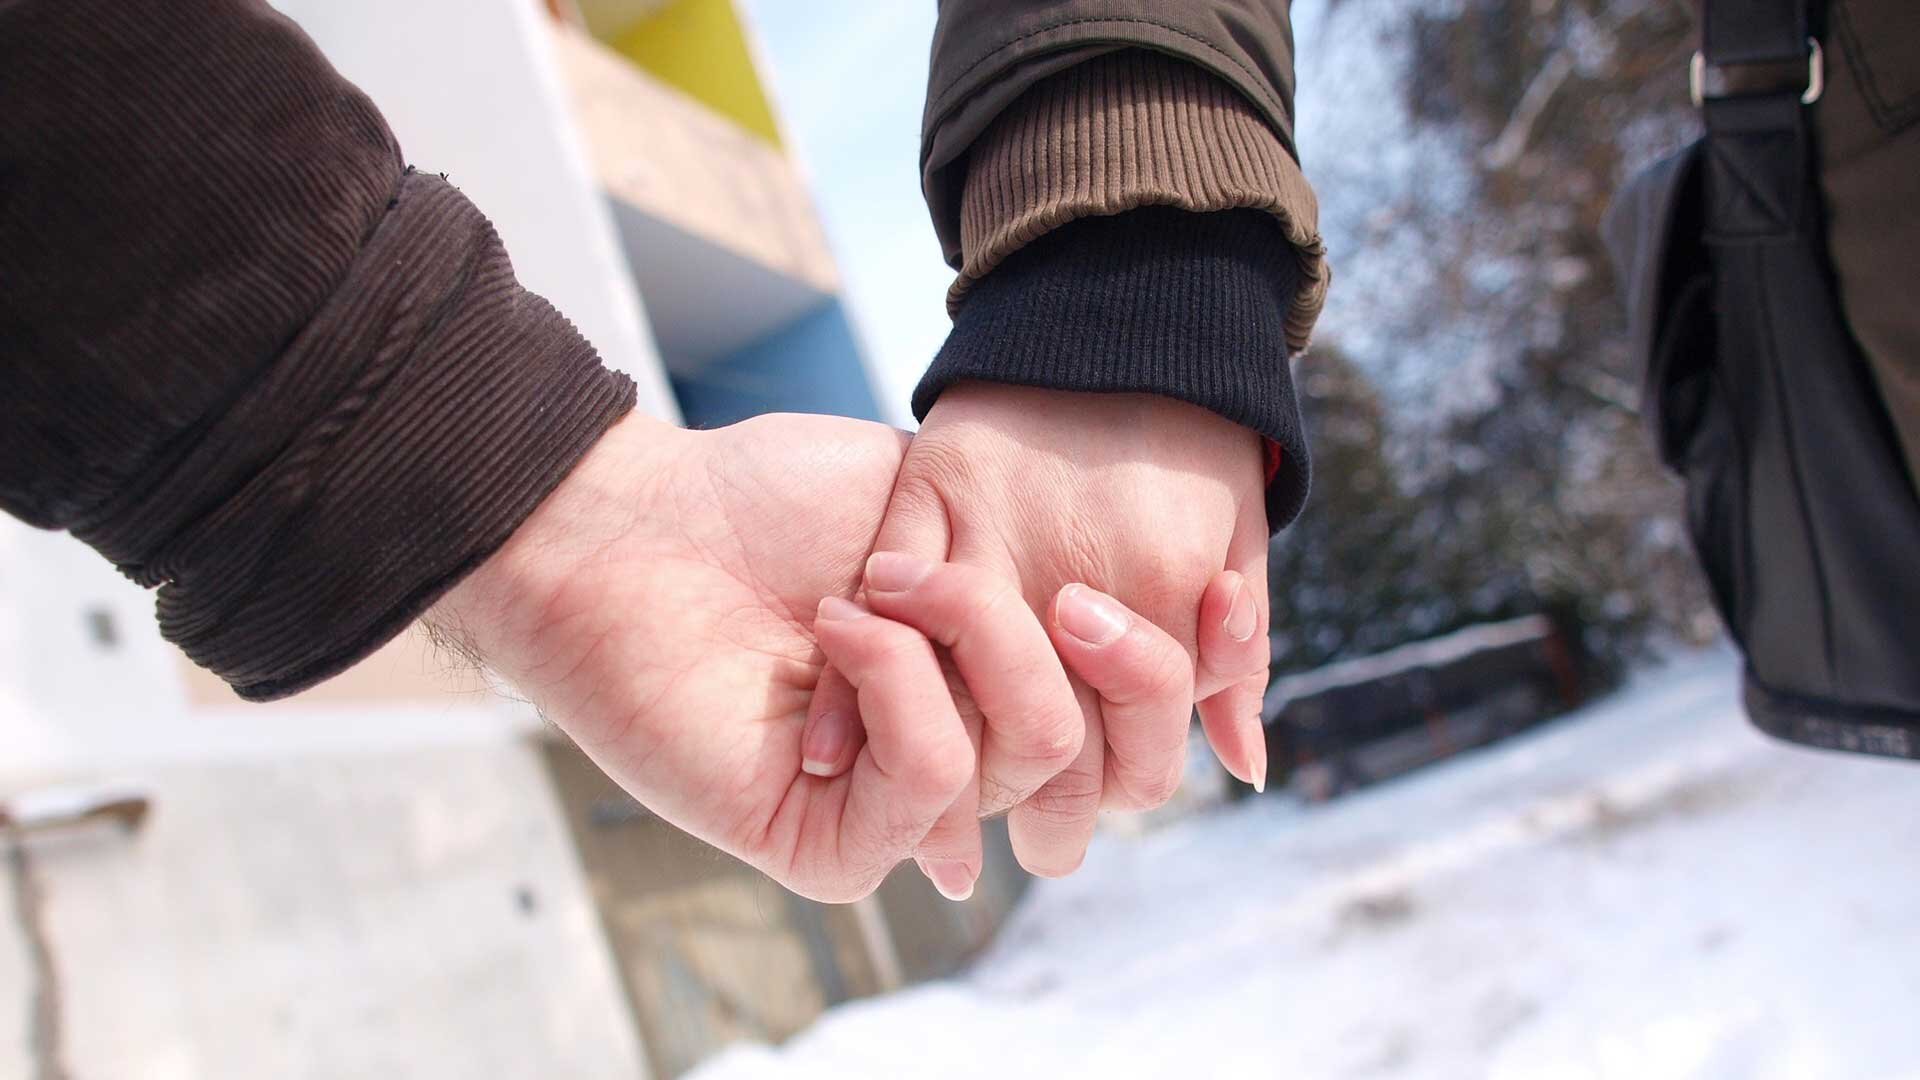 Christian-Teenagers-Beware--Cold-Weather-Not-an-Excuse-to-Hold-Hands.jpg